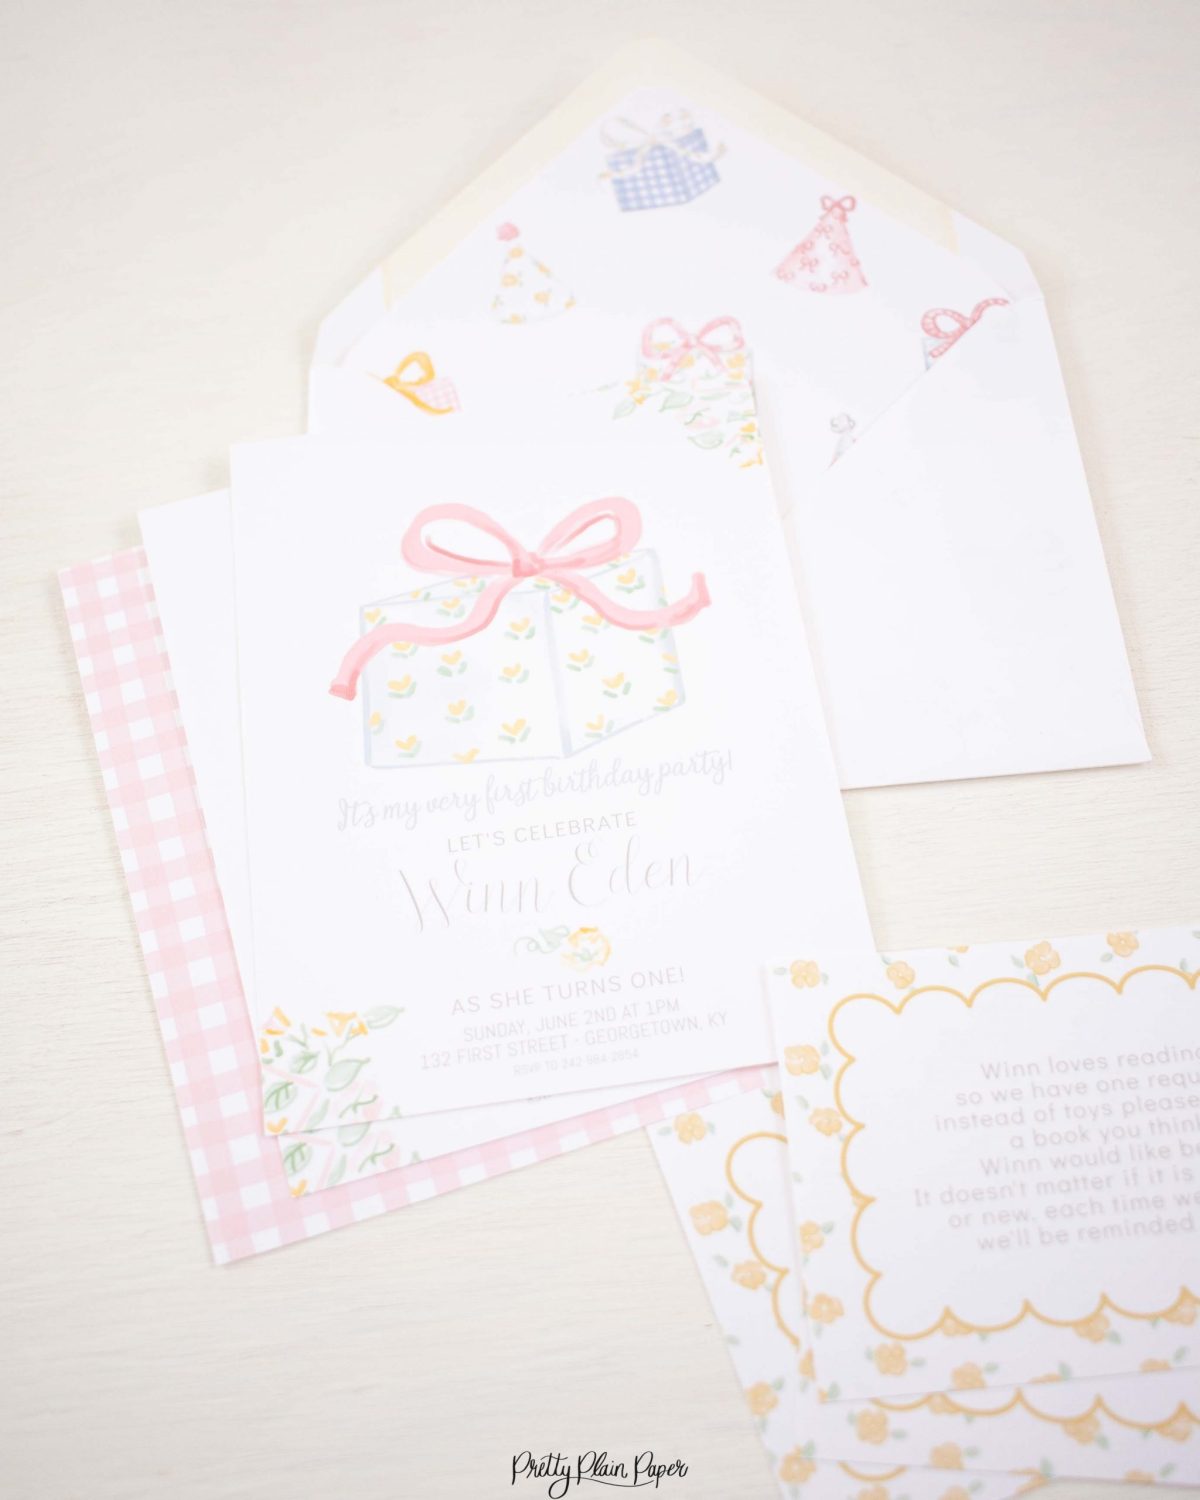 It's My Birthday Party Back of Invitation Watercolor Design by Pretty Plain Paper